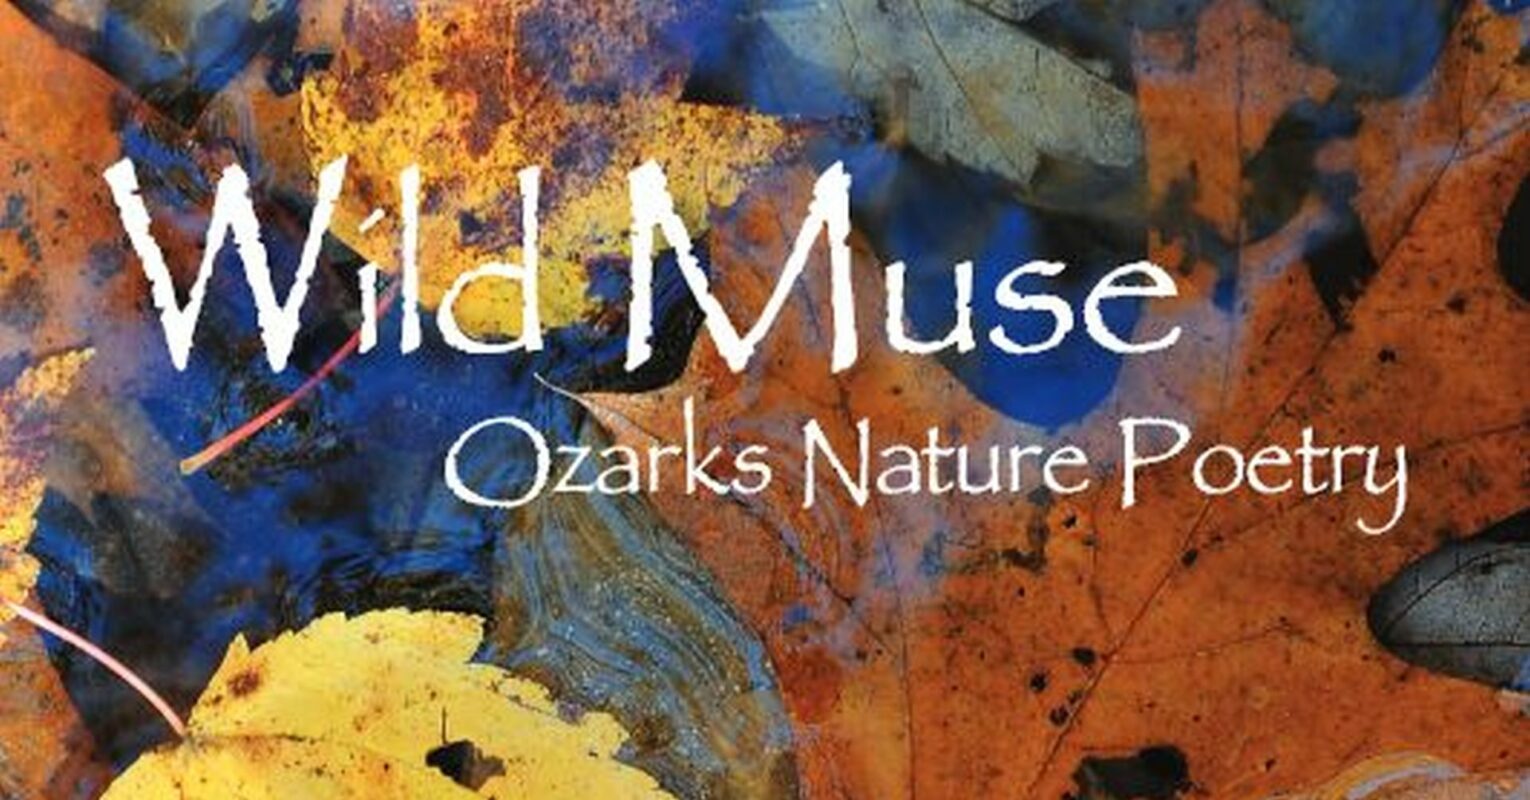 Infographic. Leaves on the background with the words "Wild Muse Ozarks Nature Poetry"